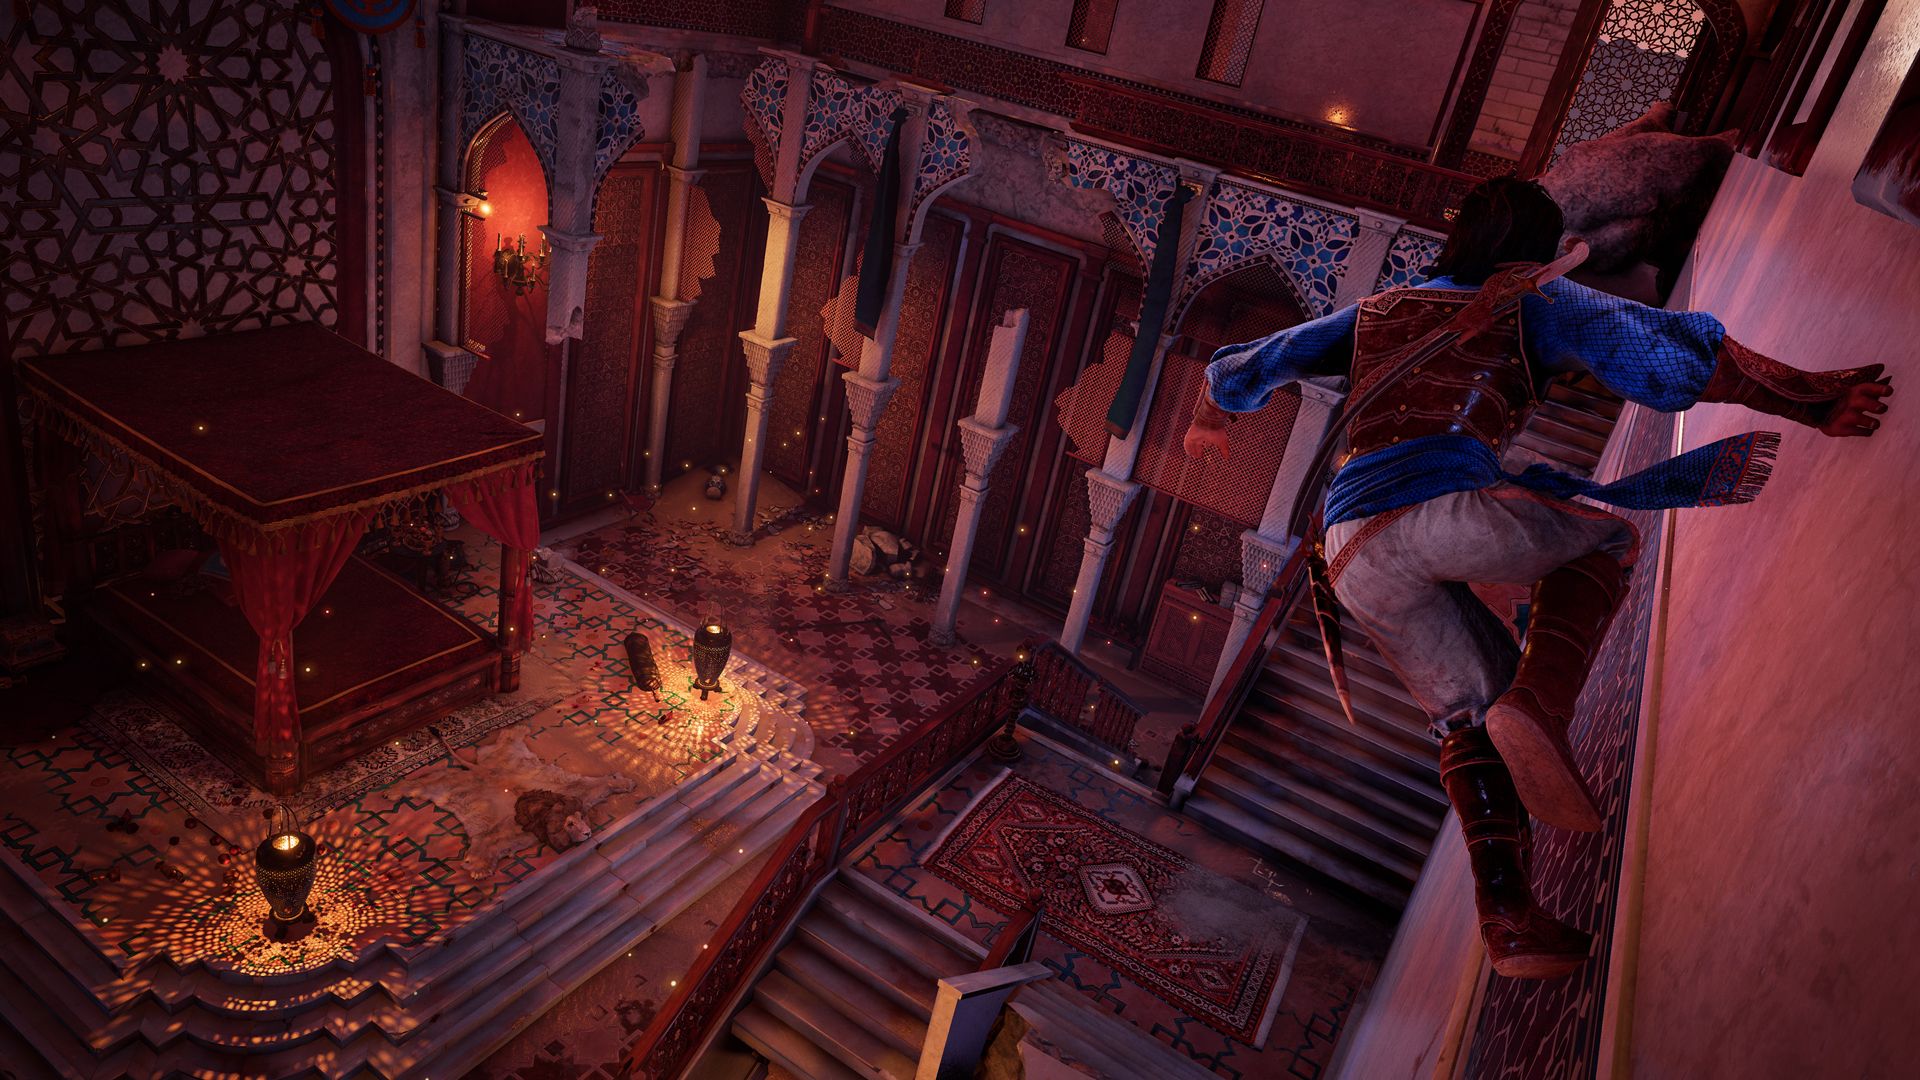 Prince of Persia: The Sands of Time Remake wants to introduce a new generation of players to a game that once defined a genre